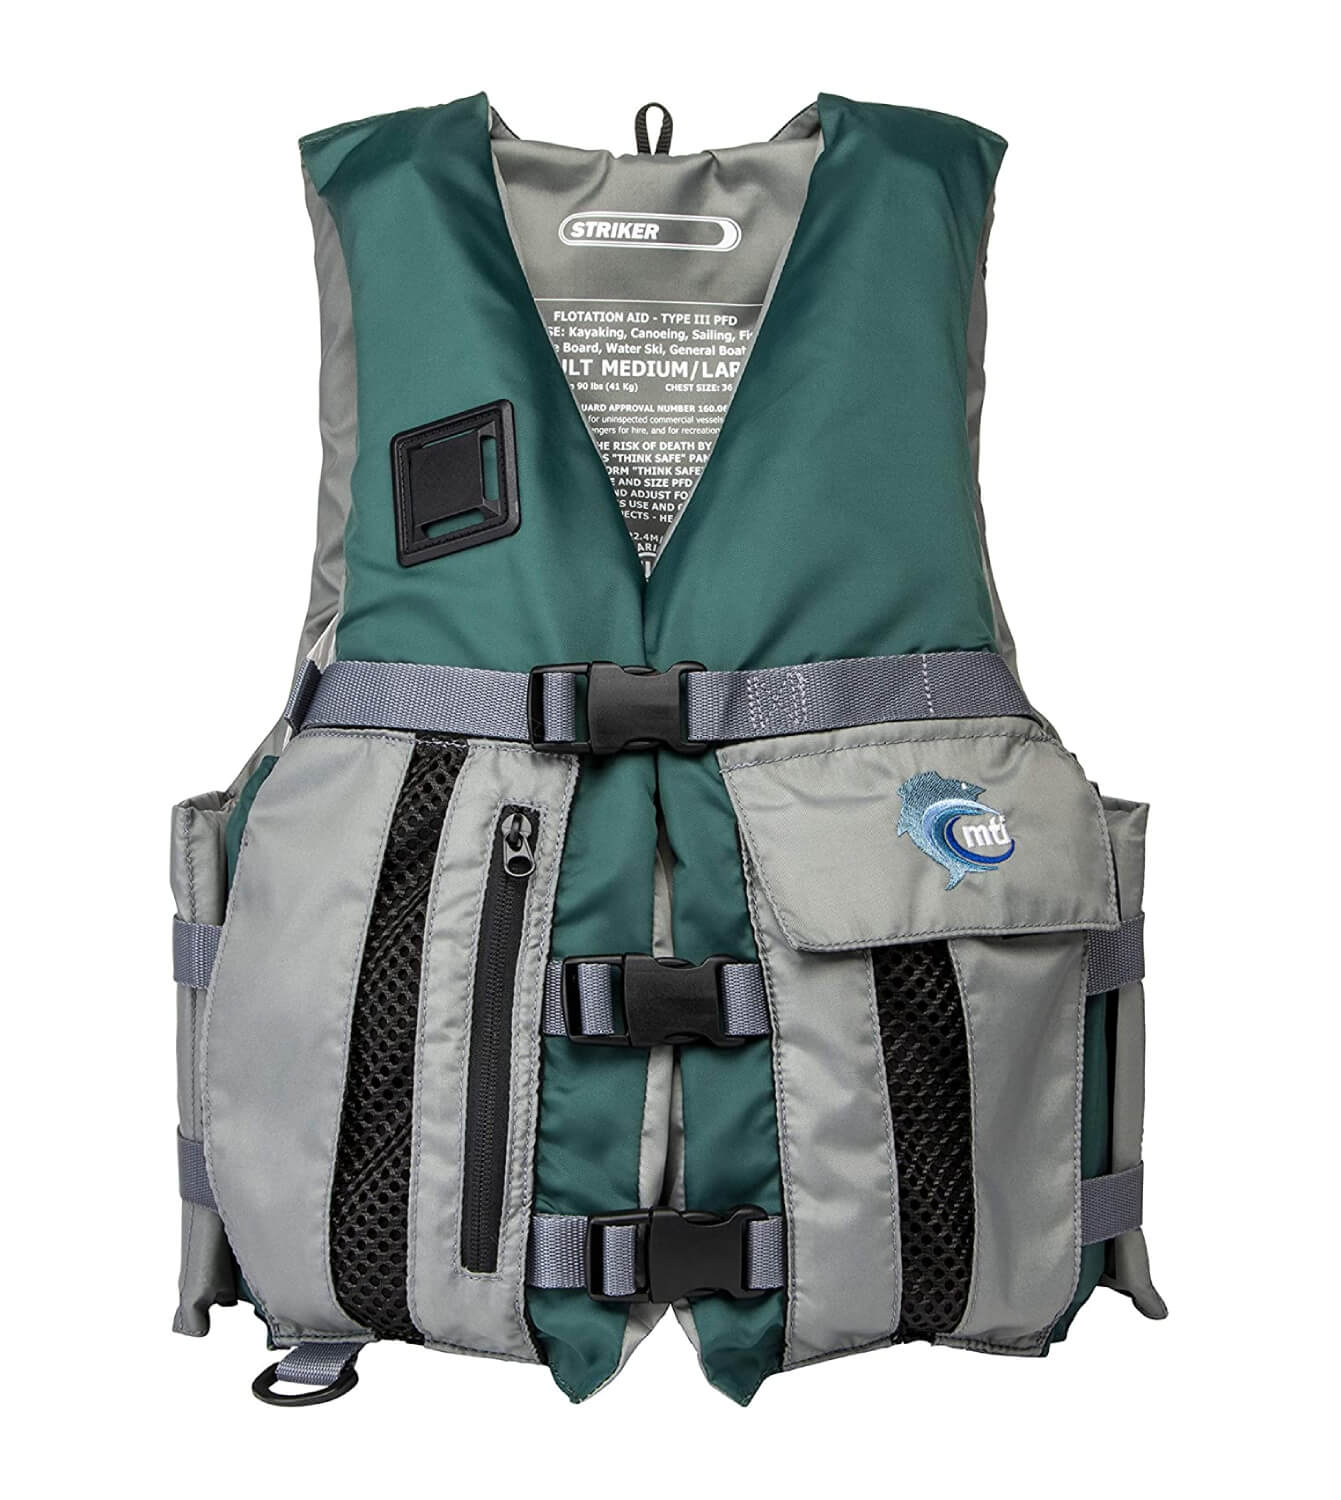 Best Fishing Life Vest: The Top 7 Fishing Life Jackets in 2022